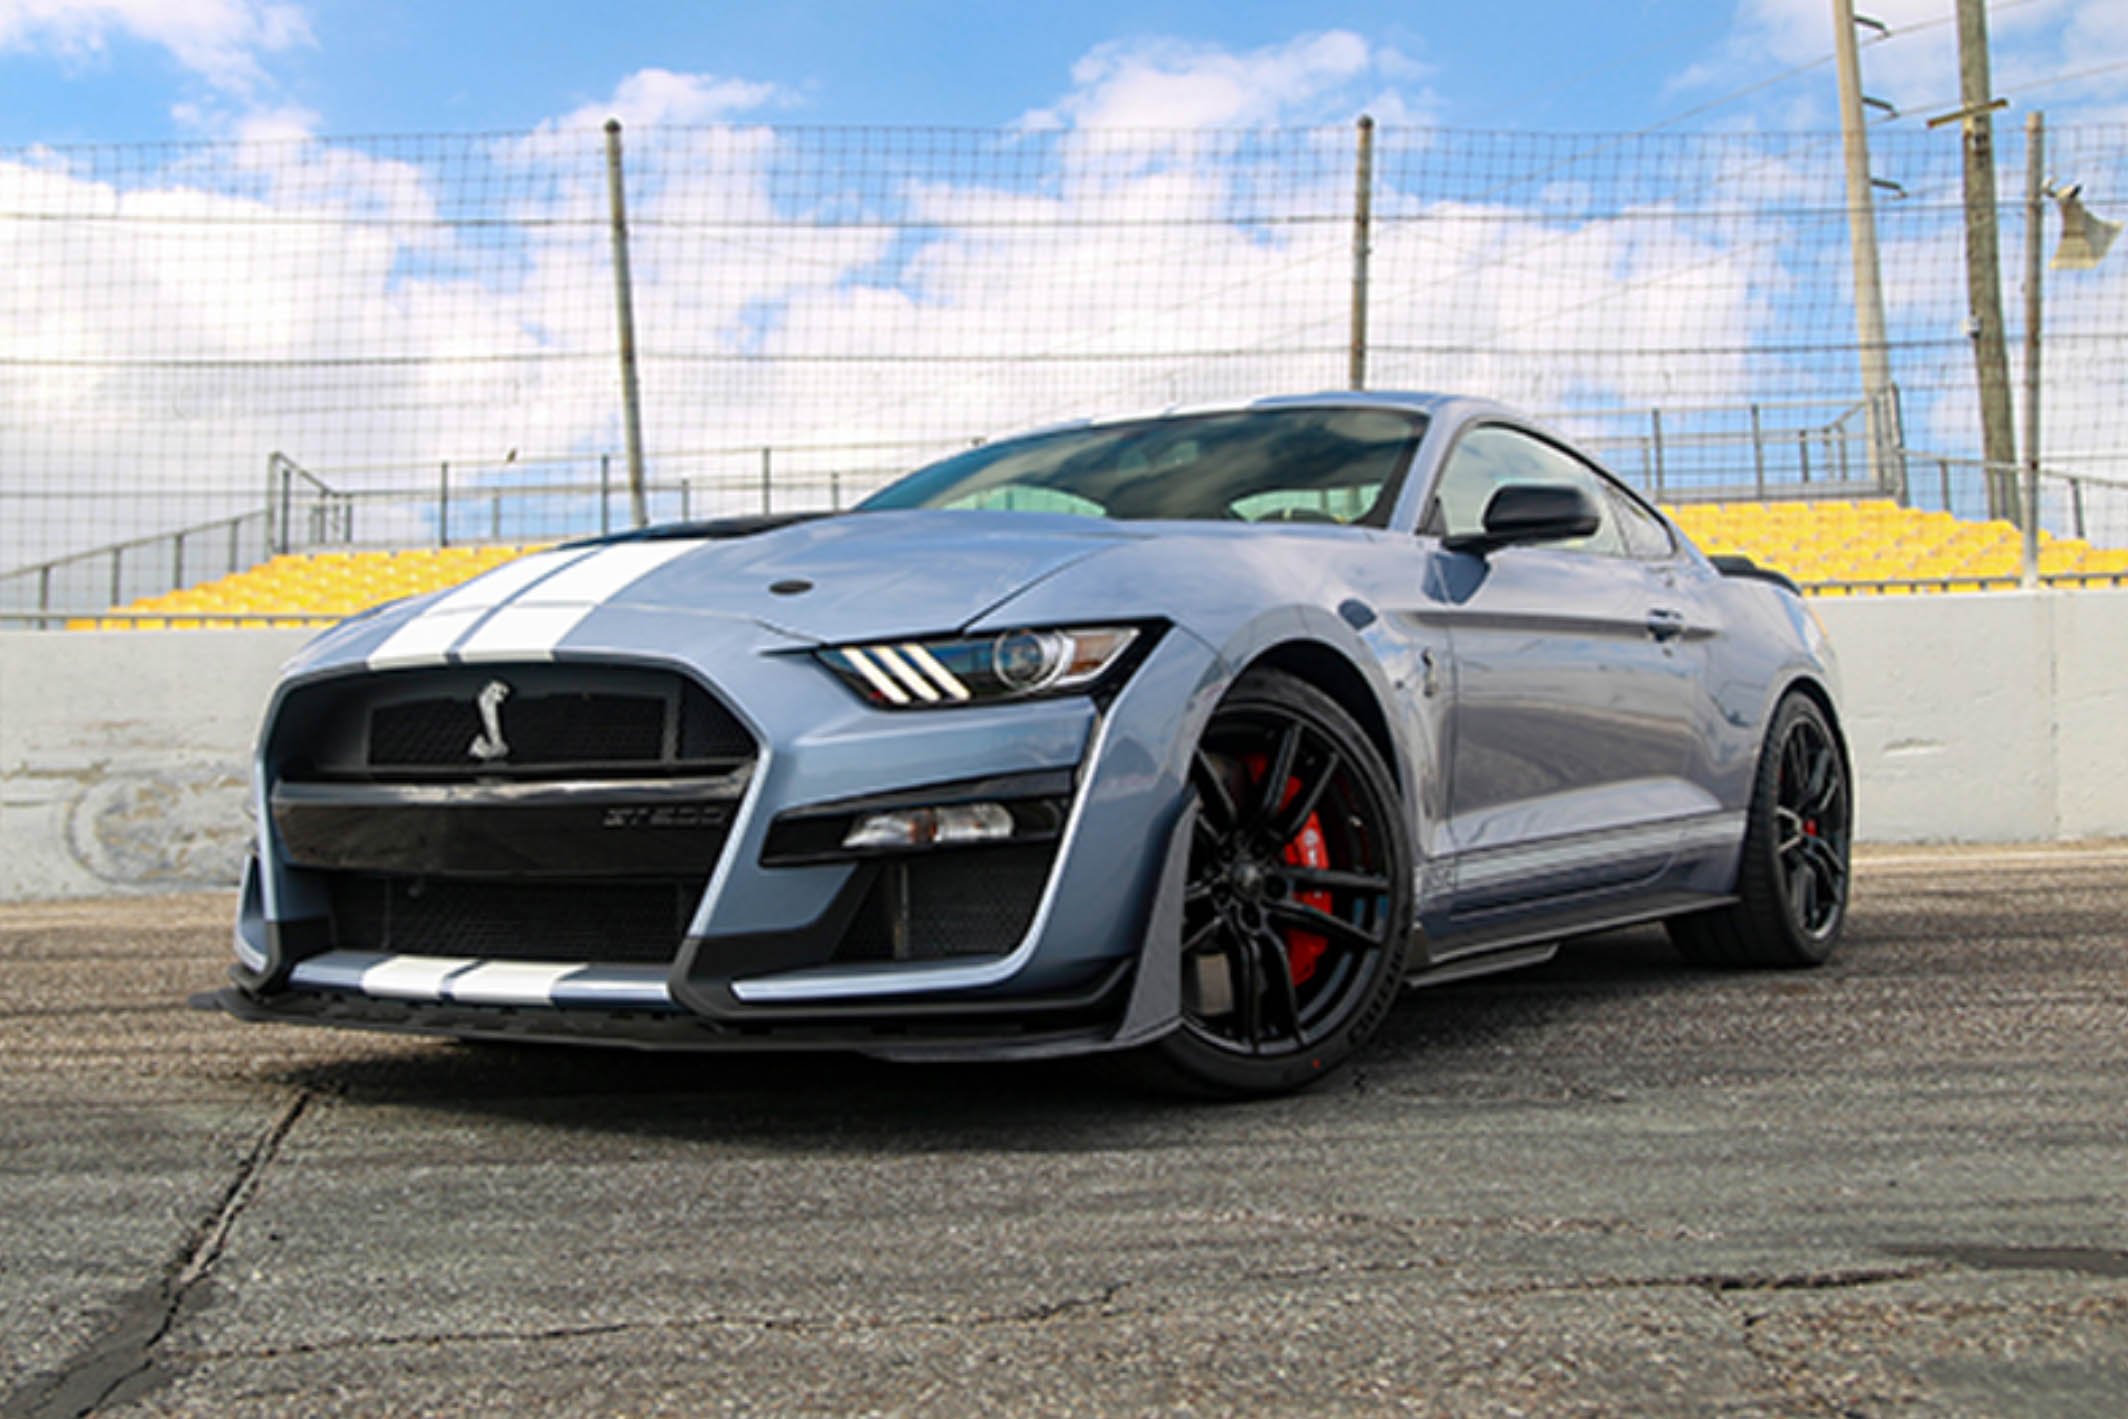 Skip The Dealership By Winning This Shelby GT500